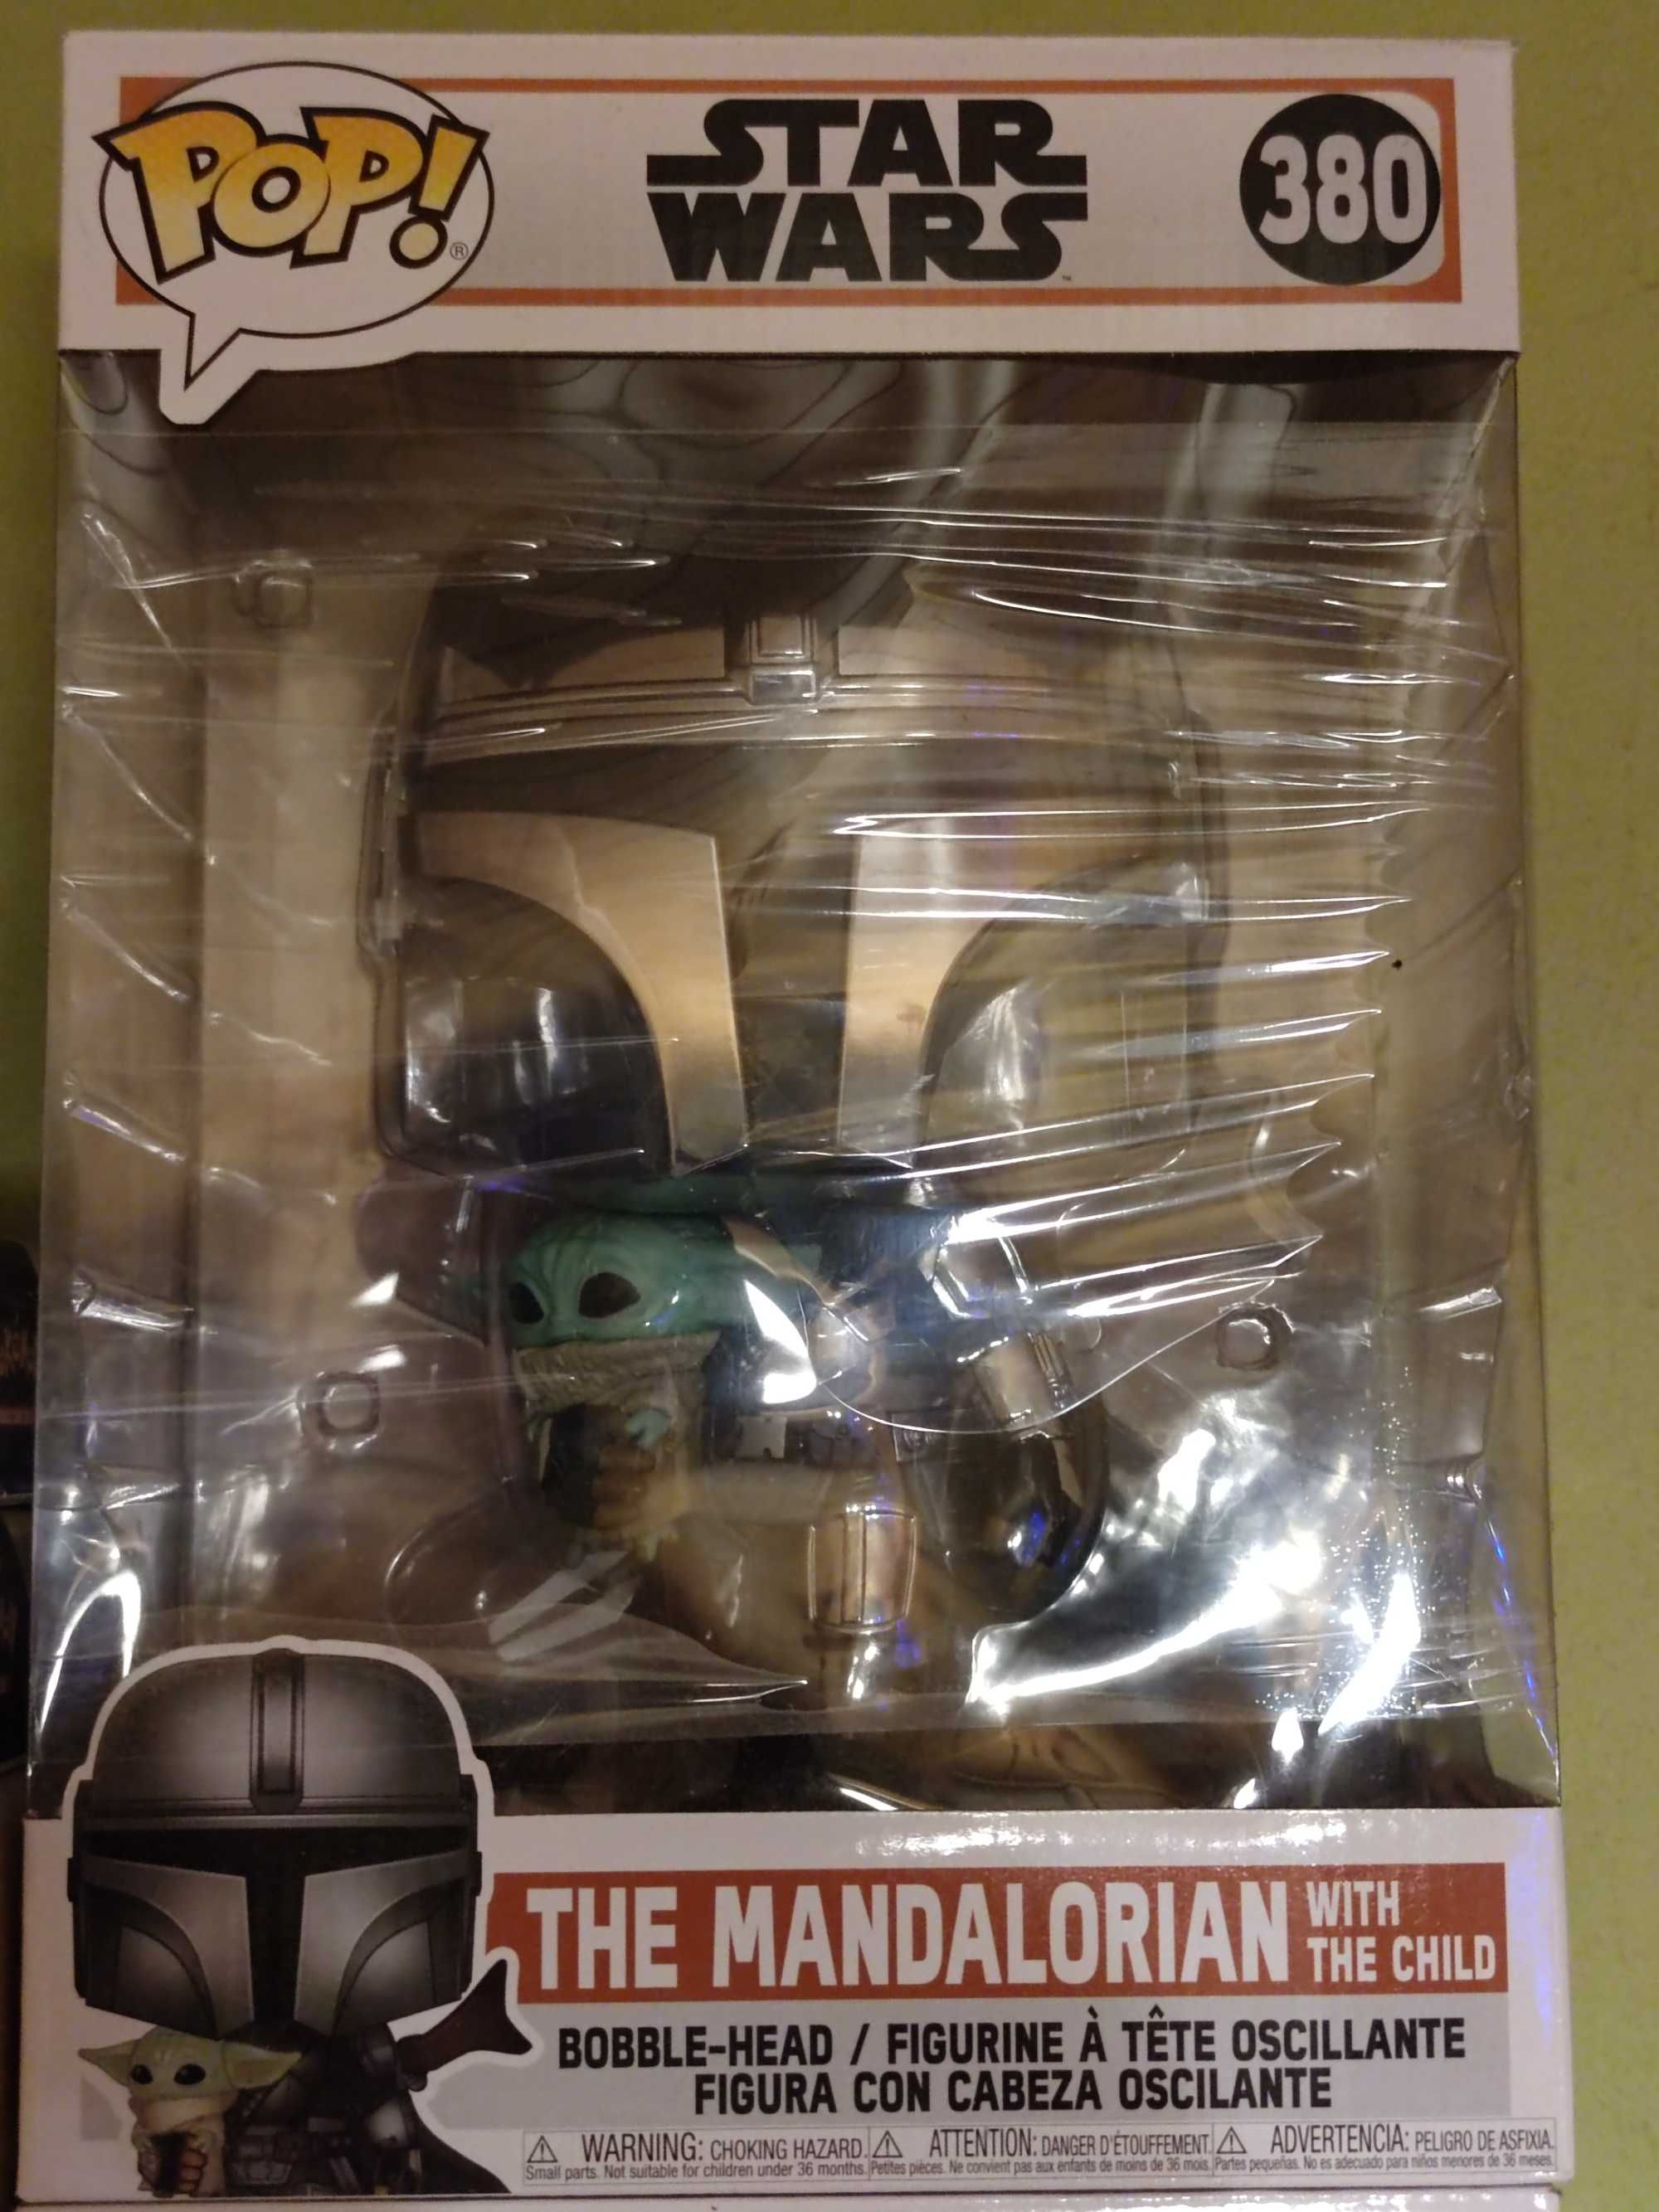 Star Wars 380 - The Mandalorian with the Child (Chrome supersize 10")